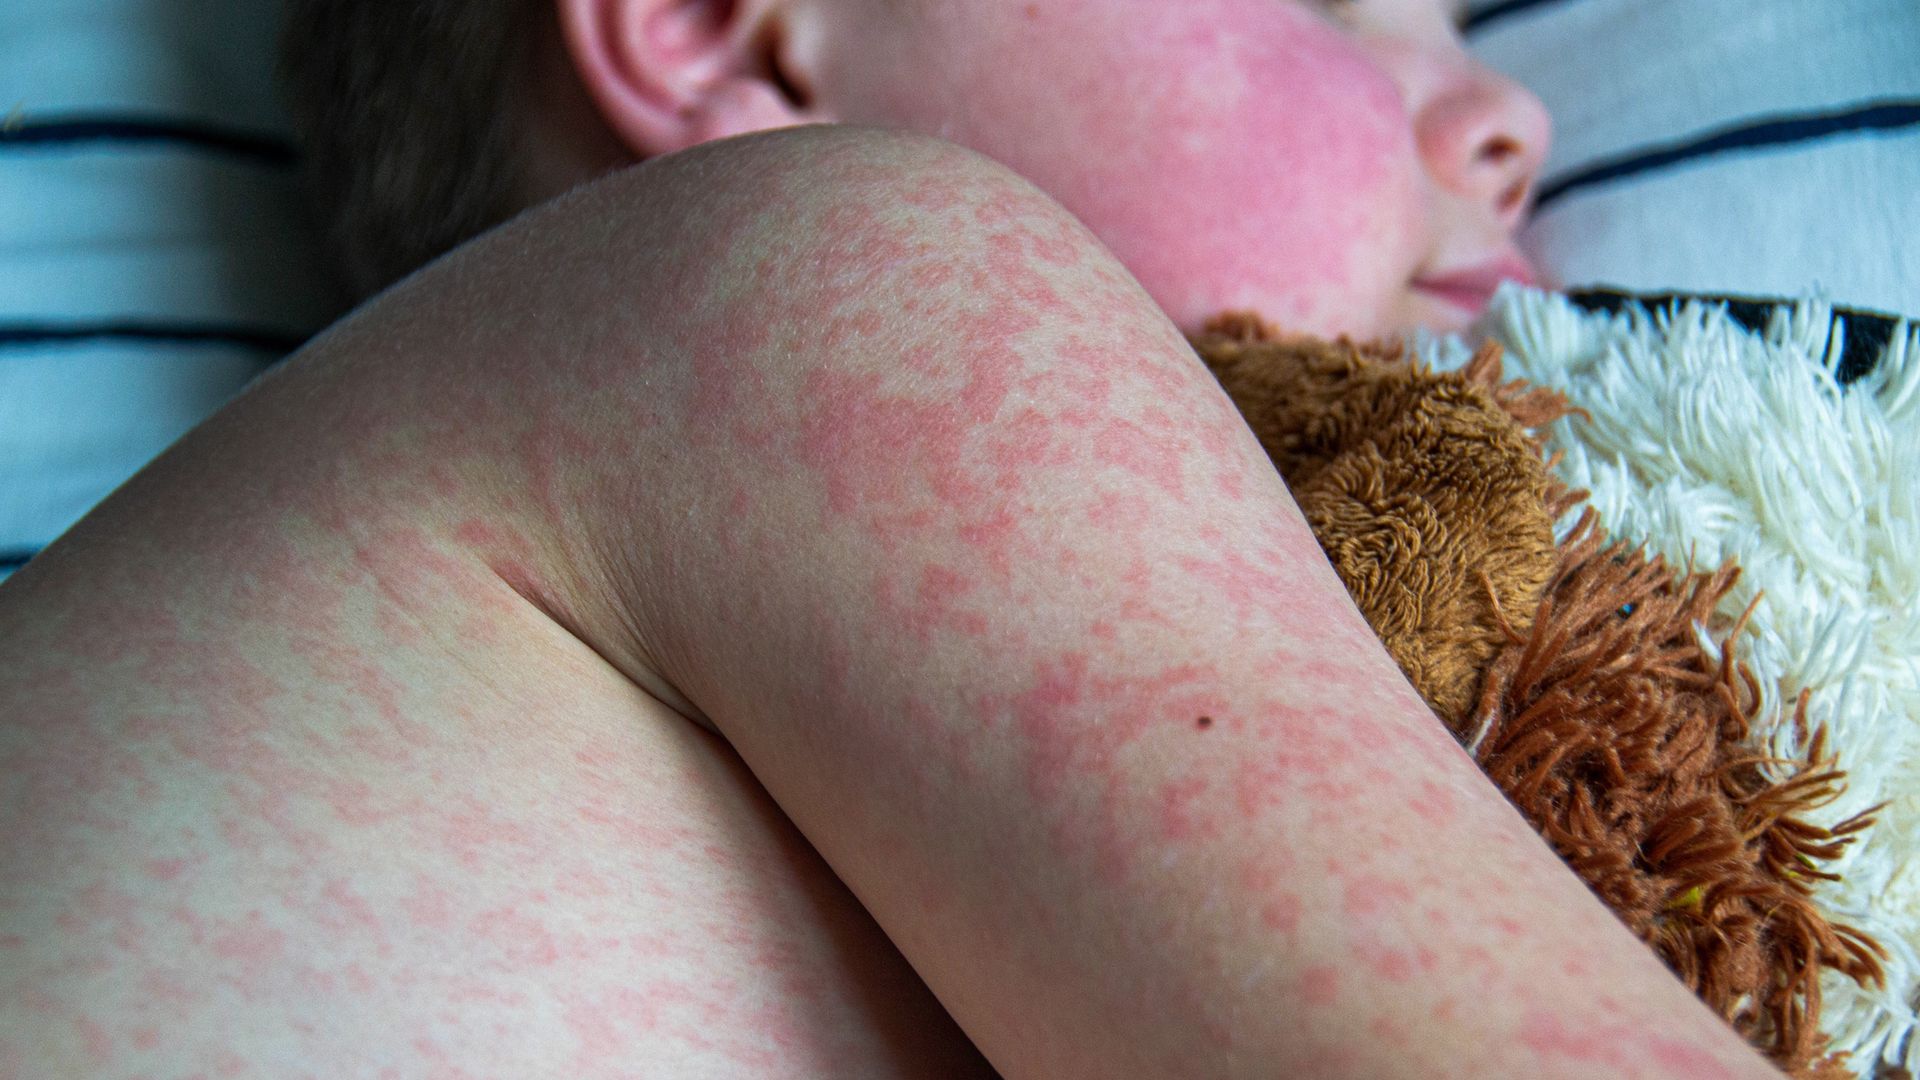 Measles cases worldwide almost double in a year - as England faces measles 'emergency'...